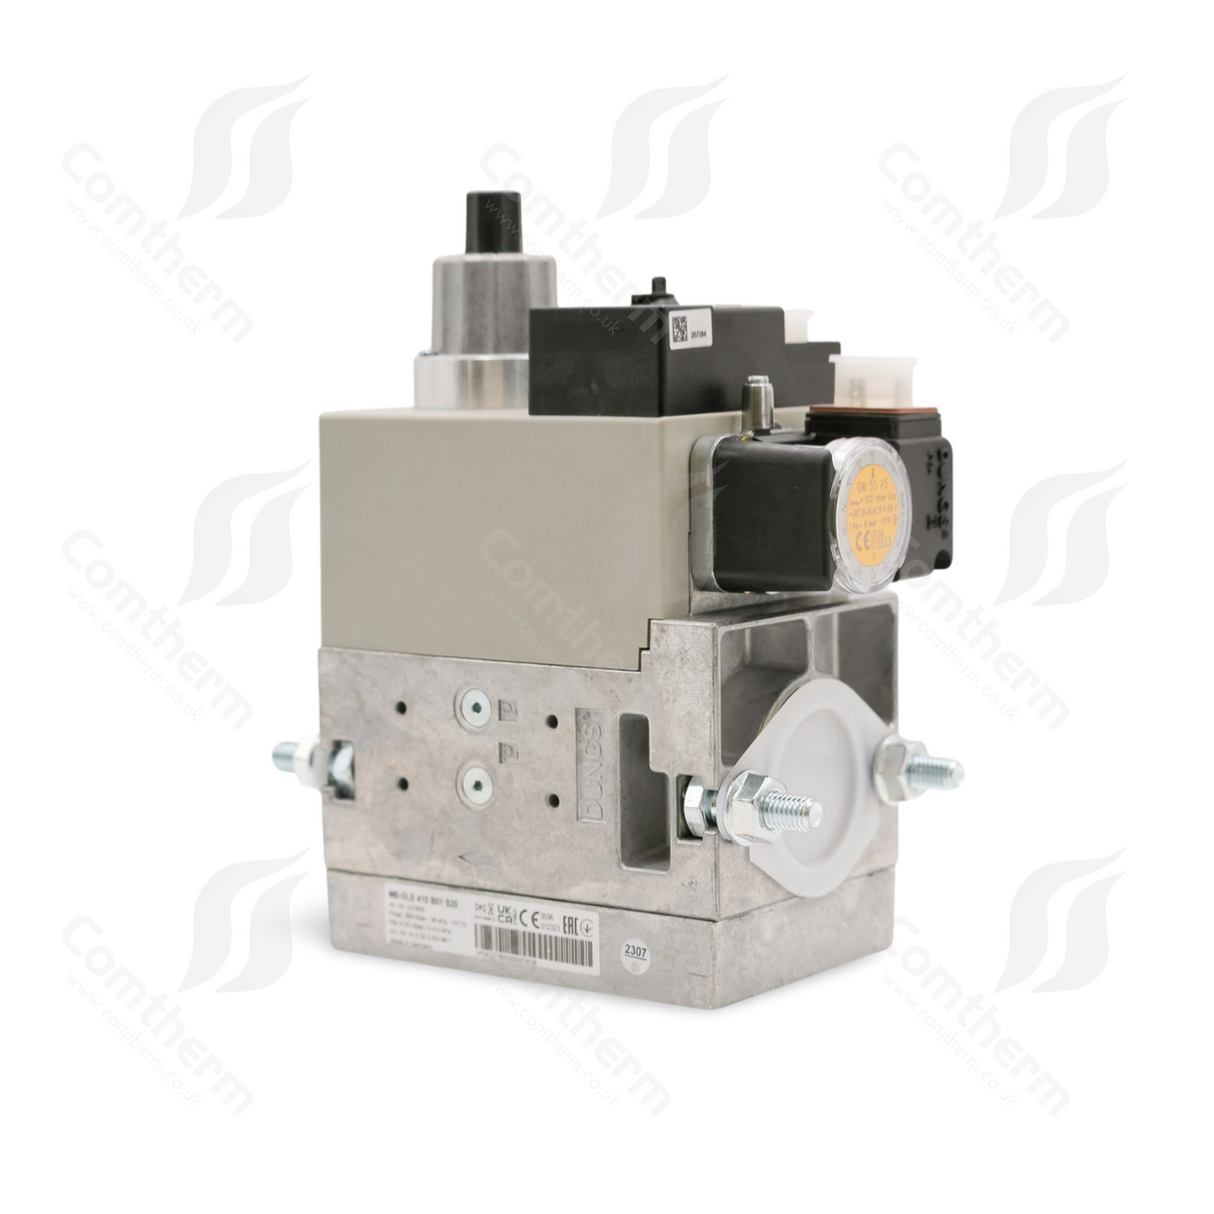 Dungs MB-DLE 410 B01 S52 + GW150A5 Multibloc Gas Valve - 110v